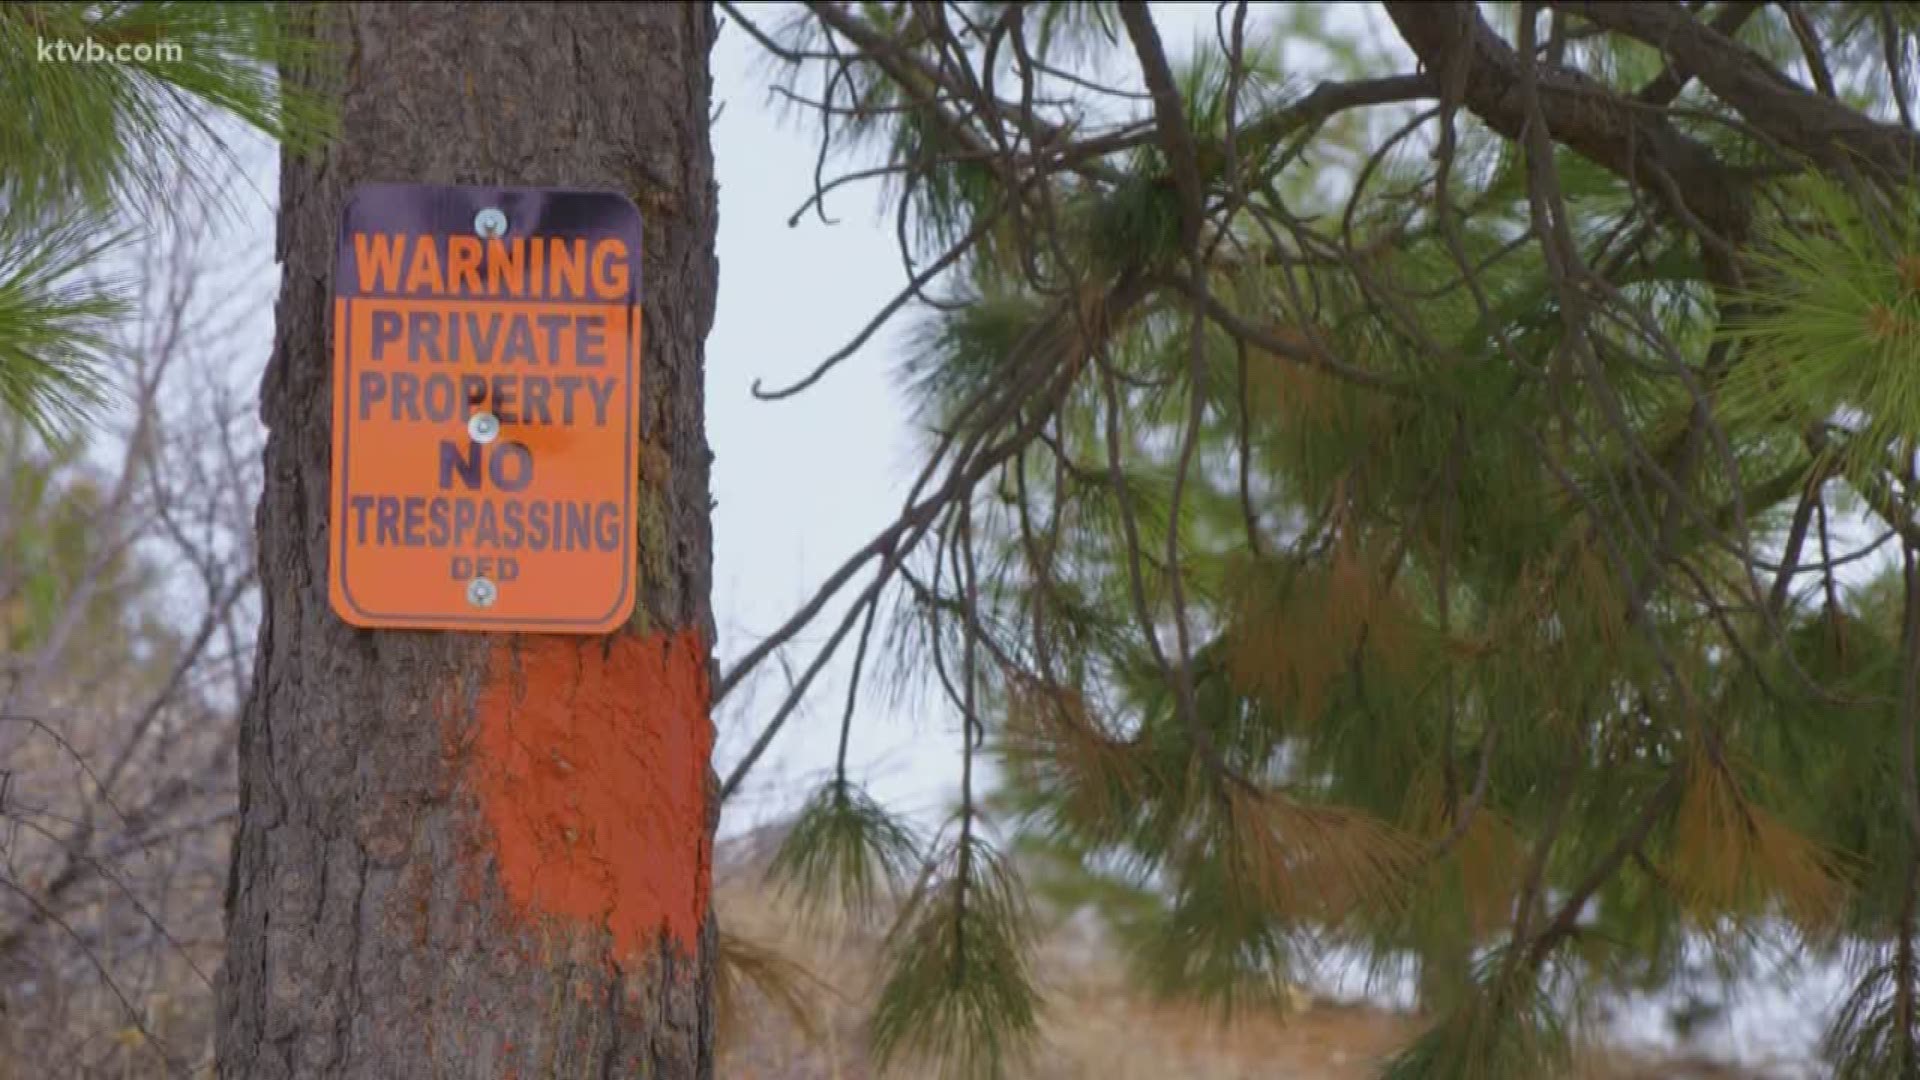 Public Lands Access Clashes With Private Property Rights As